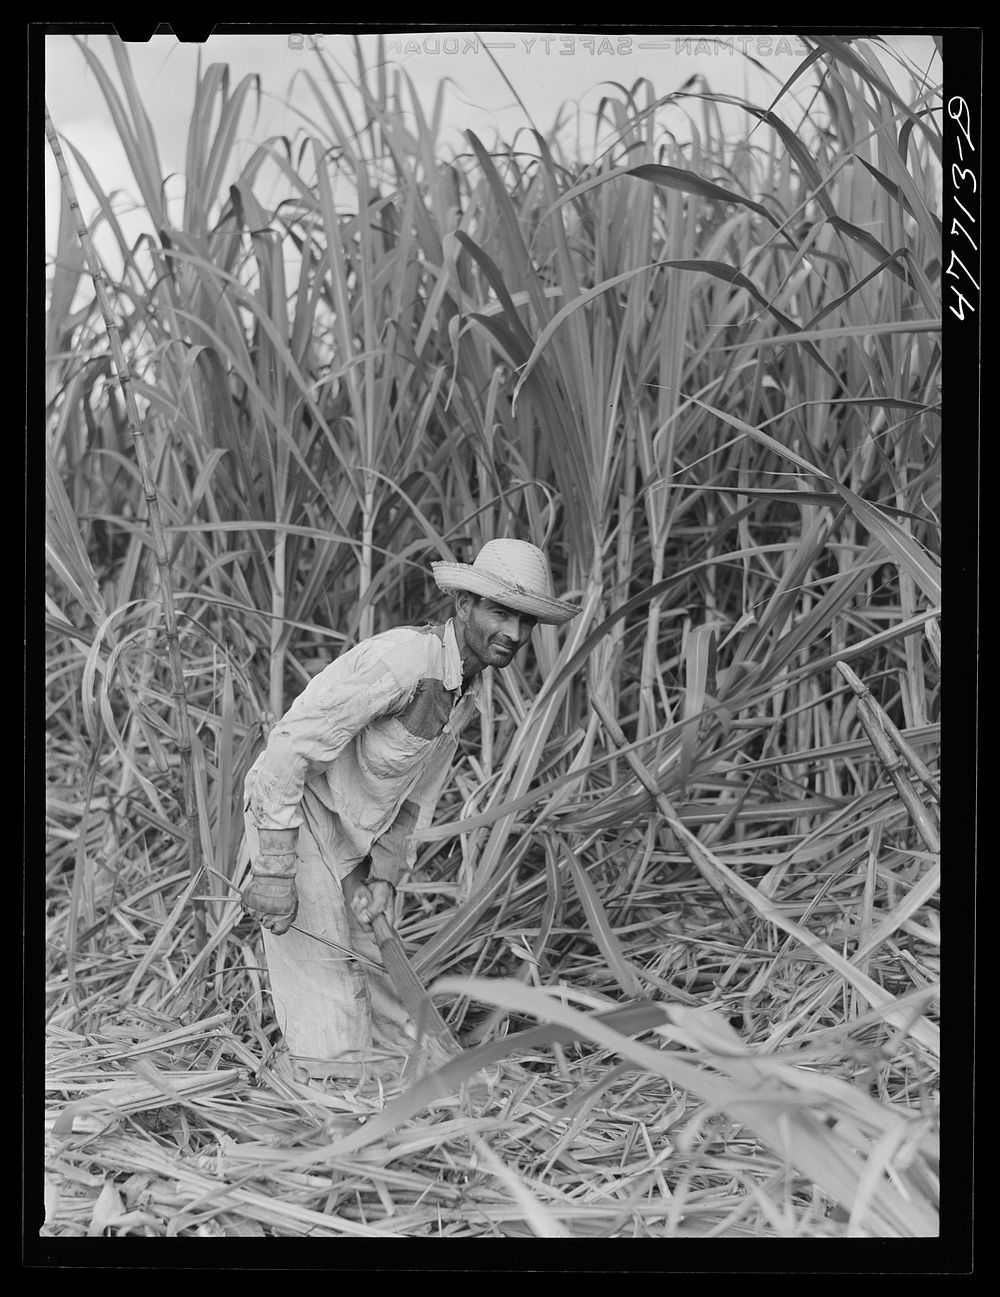 Yauco, Puerto Rico (vicinity). Harvesting sugar cane in a sugar cane field. Sourced from the Library of Congress.